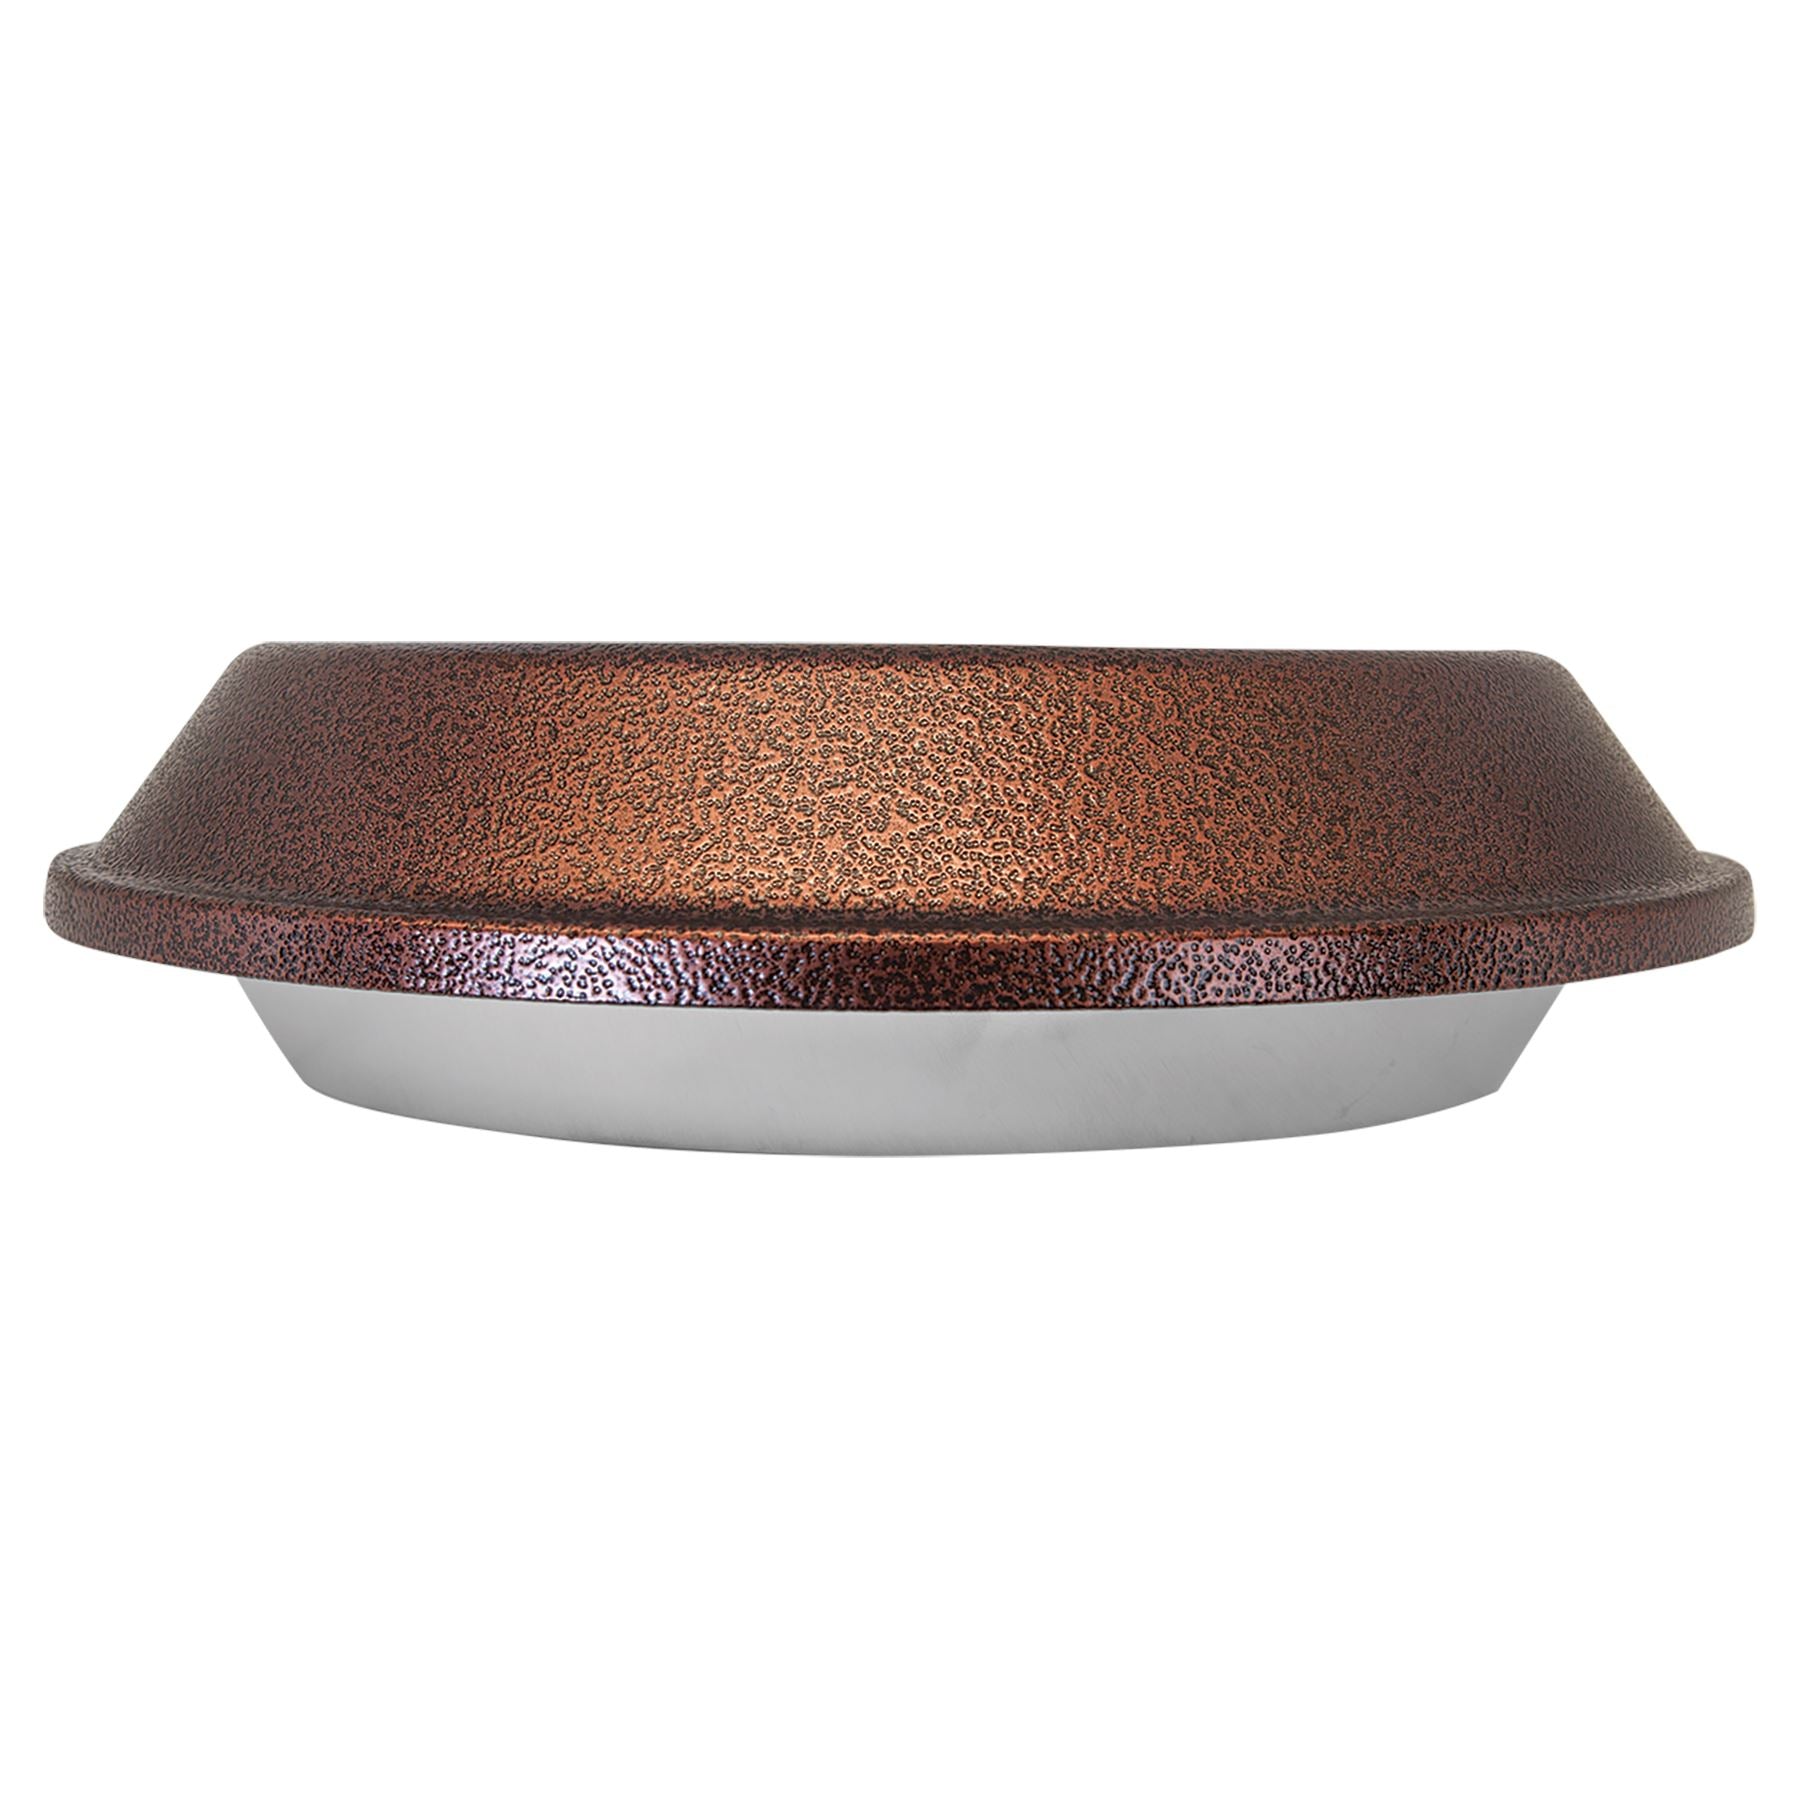 Cake Pan with Engraved Design on Copper Colored Lid - Aluminum 9